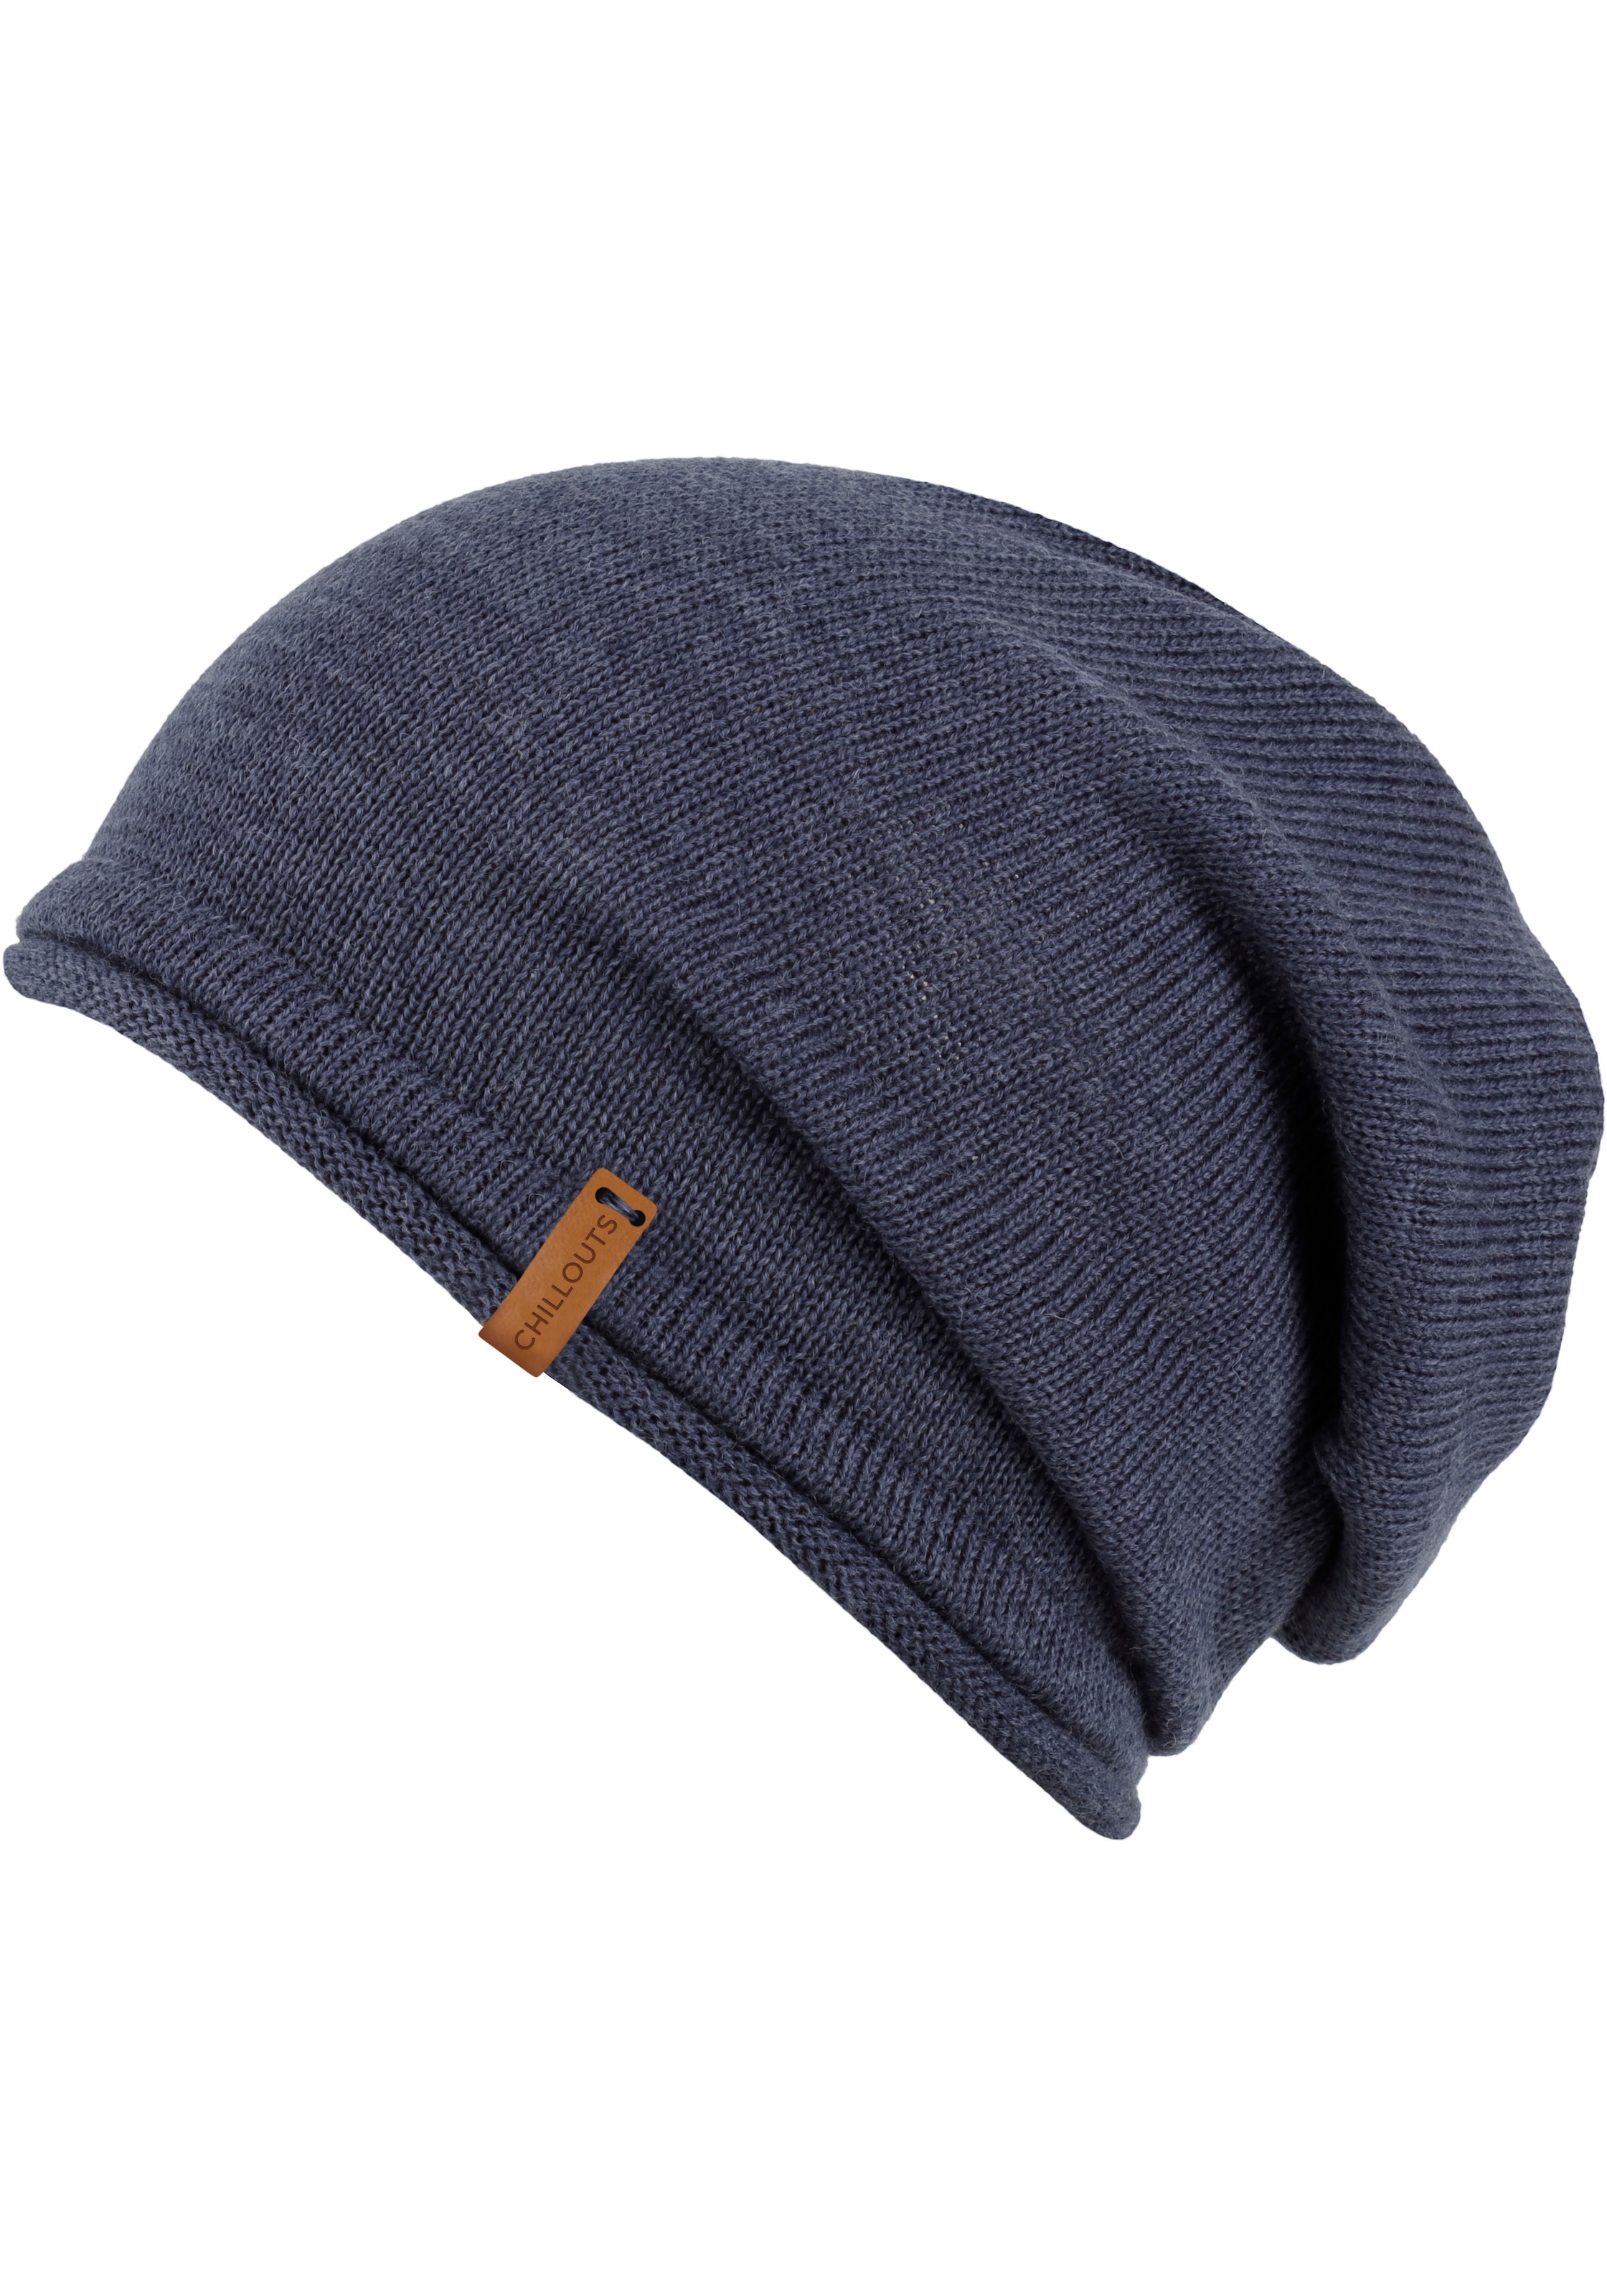 Oversize One chillouts ♕ Beanie, Size bei Mütze,